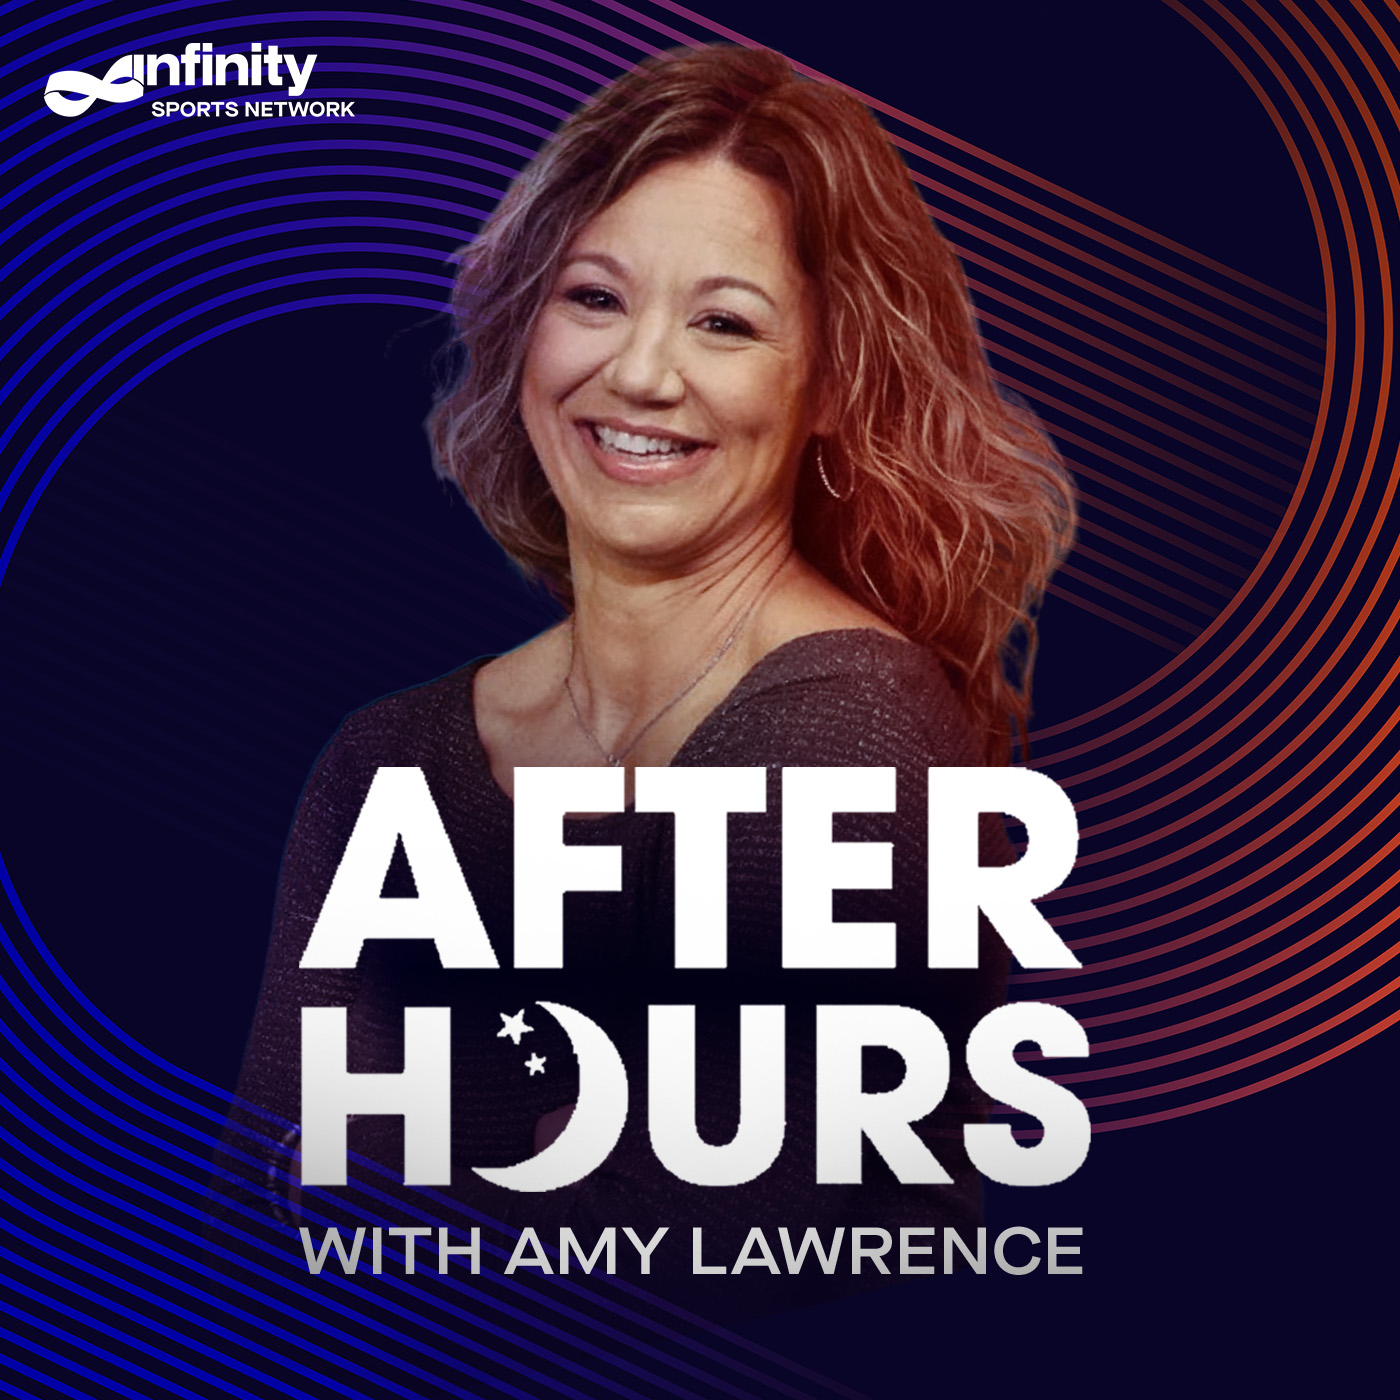 1-26-22 After Hours with Amy Lawrence PODCAST: Hour 2